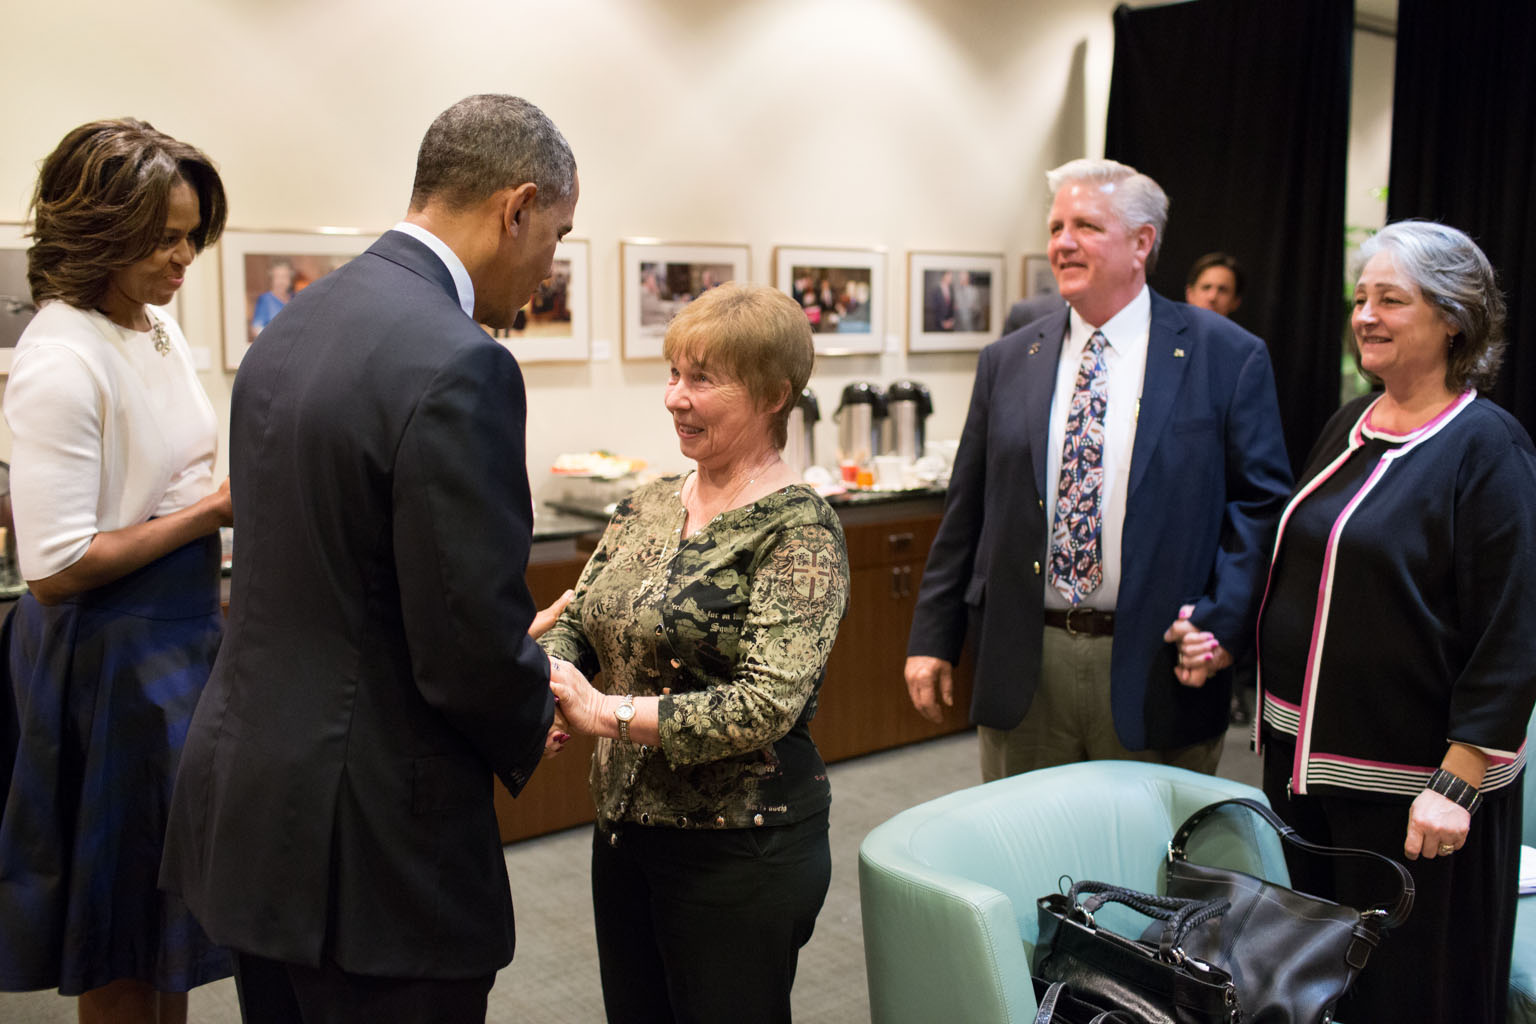 President Barack Obama and First Lady Michelle Obama meet with Texans who wrote letters to the President about the Affordable Care Act (ACA), at the Lyndon B. Johnson (LBJ) Presidential Library and Museum in Austin, Texas, April 10, 2014. Participants inc